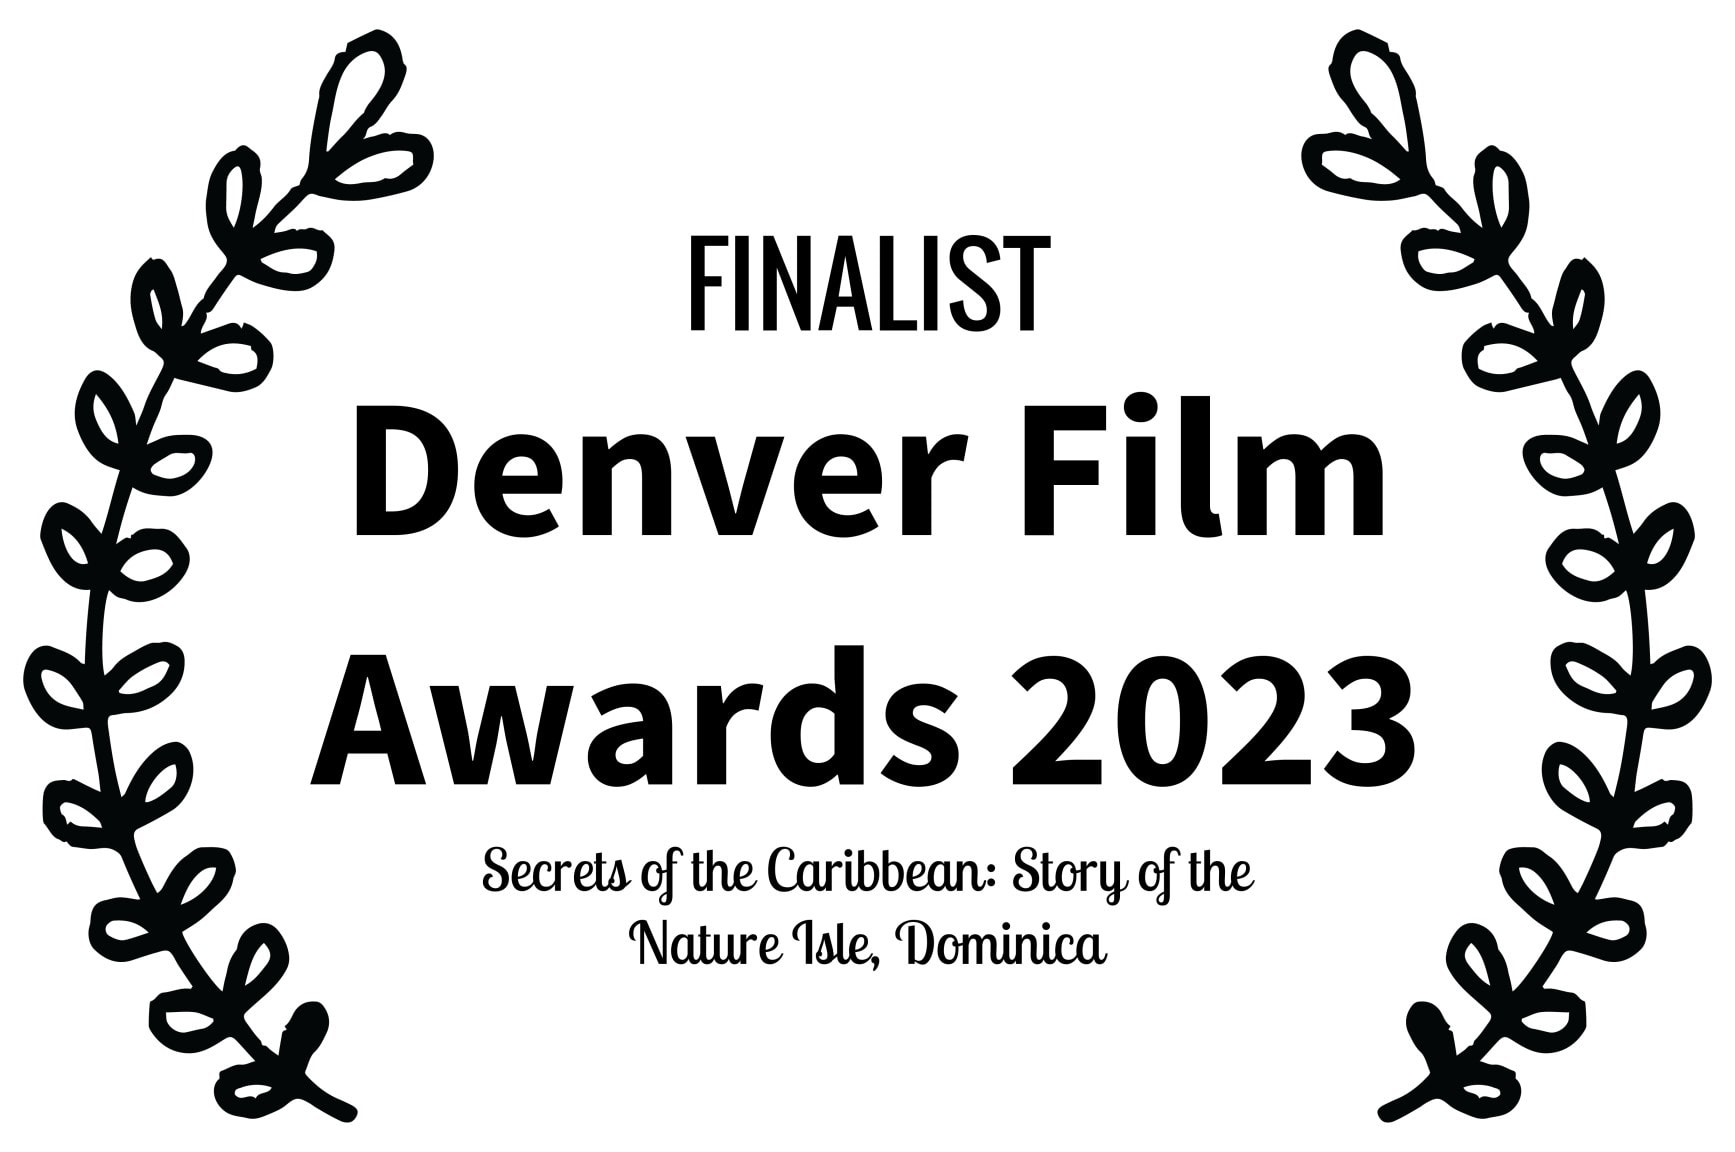 FINALIST - Denver Film Awards 2023 - Secrets of the Caribbean Story of the Nature Isle Dominica